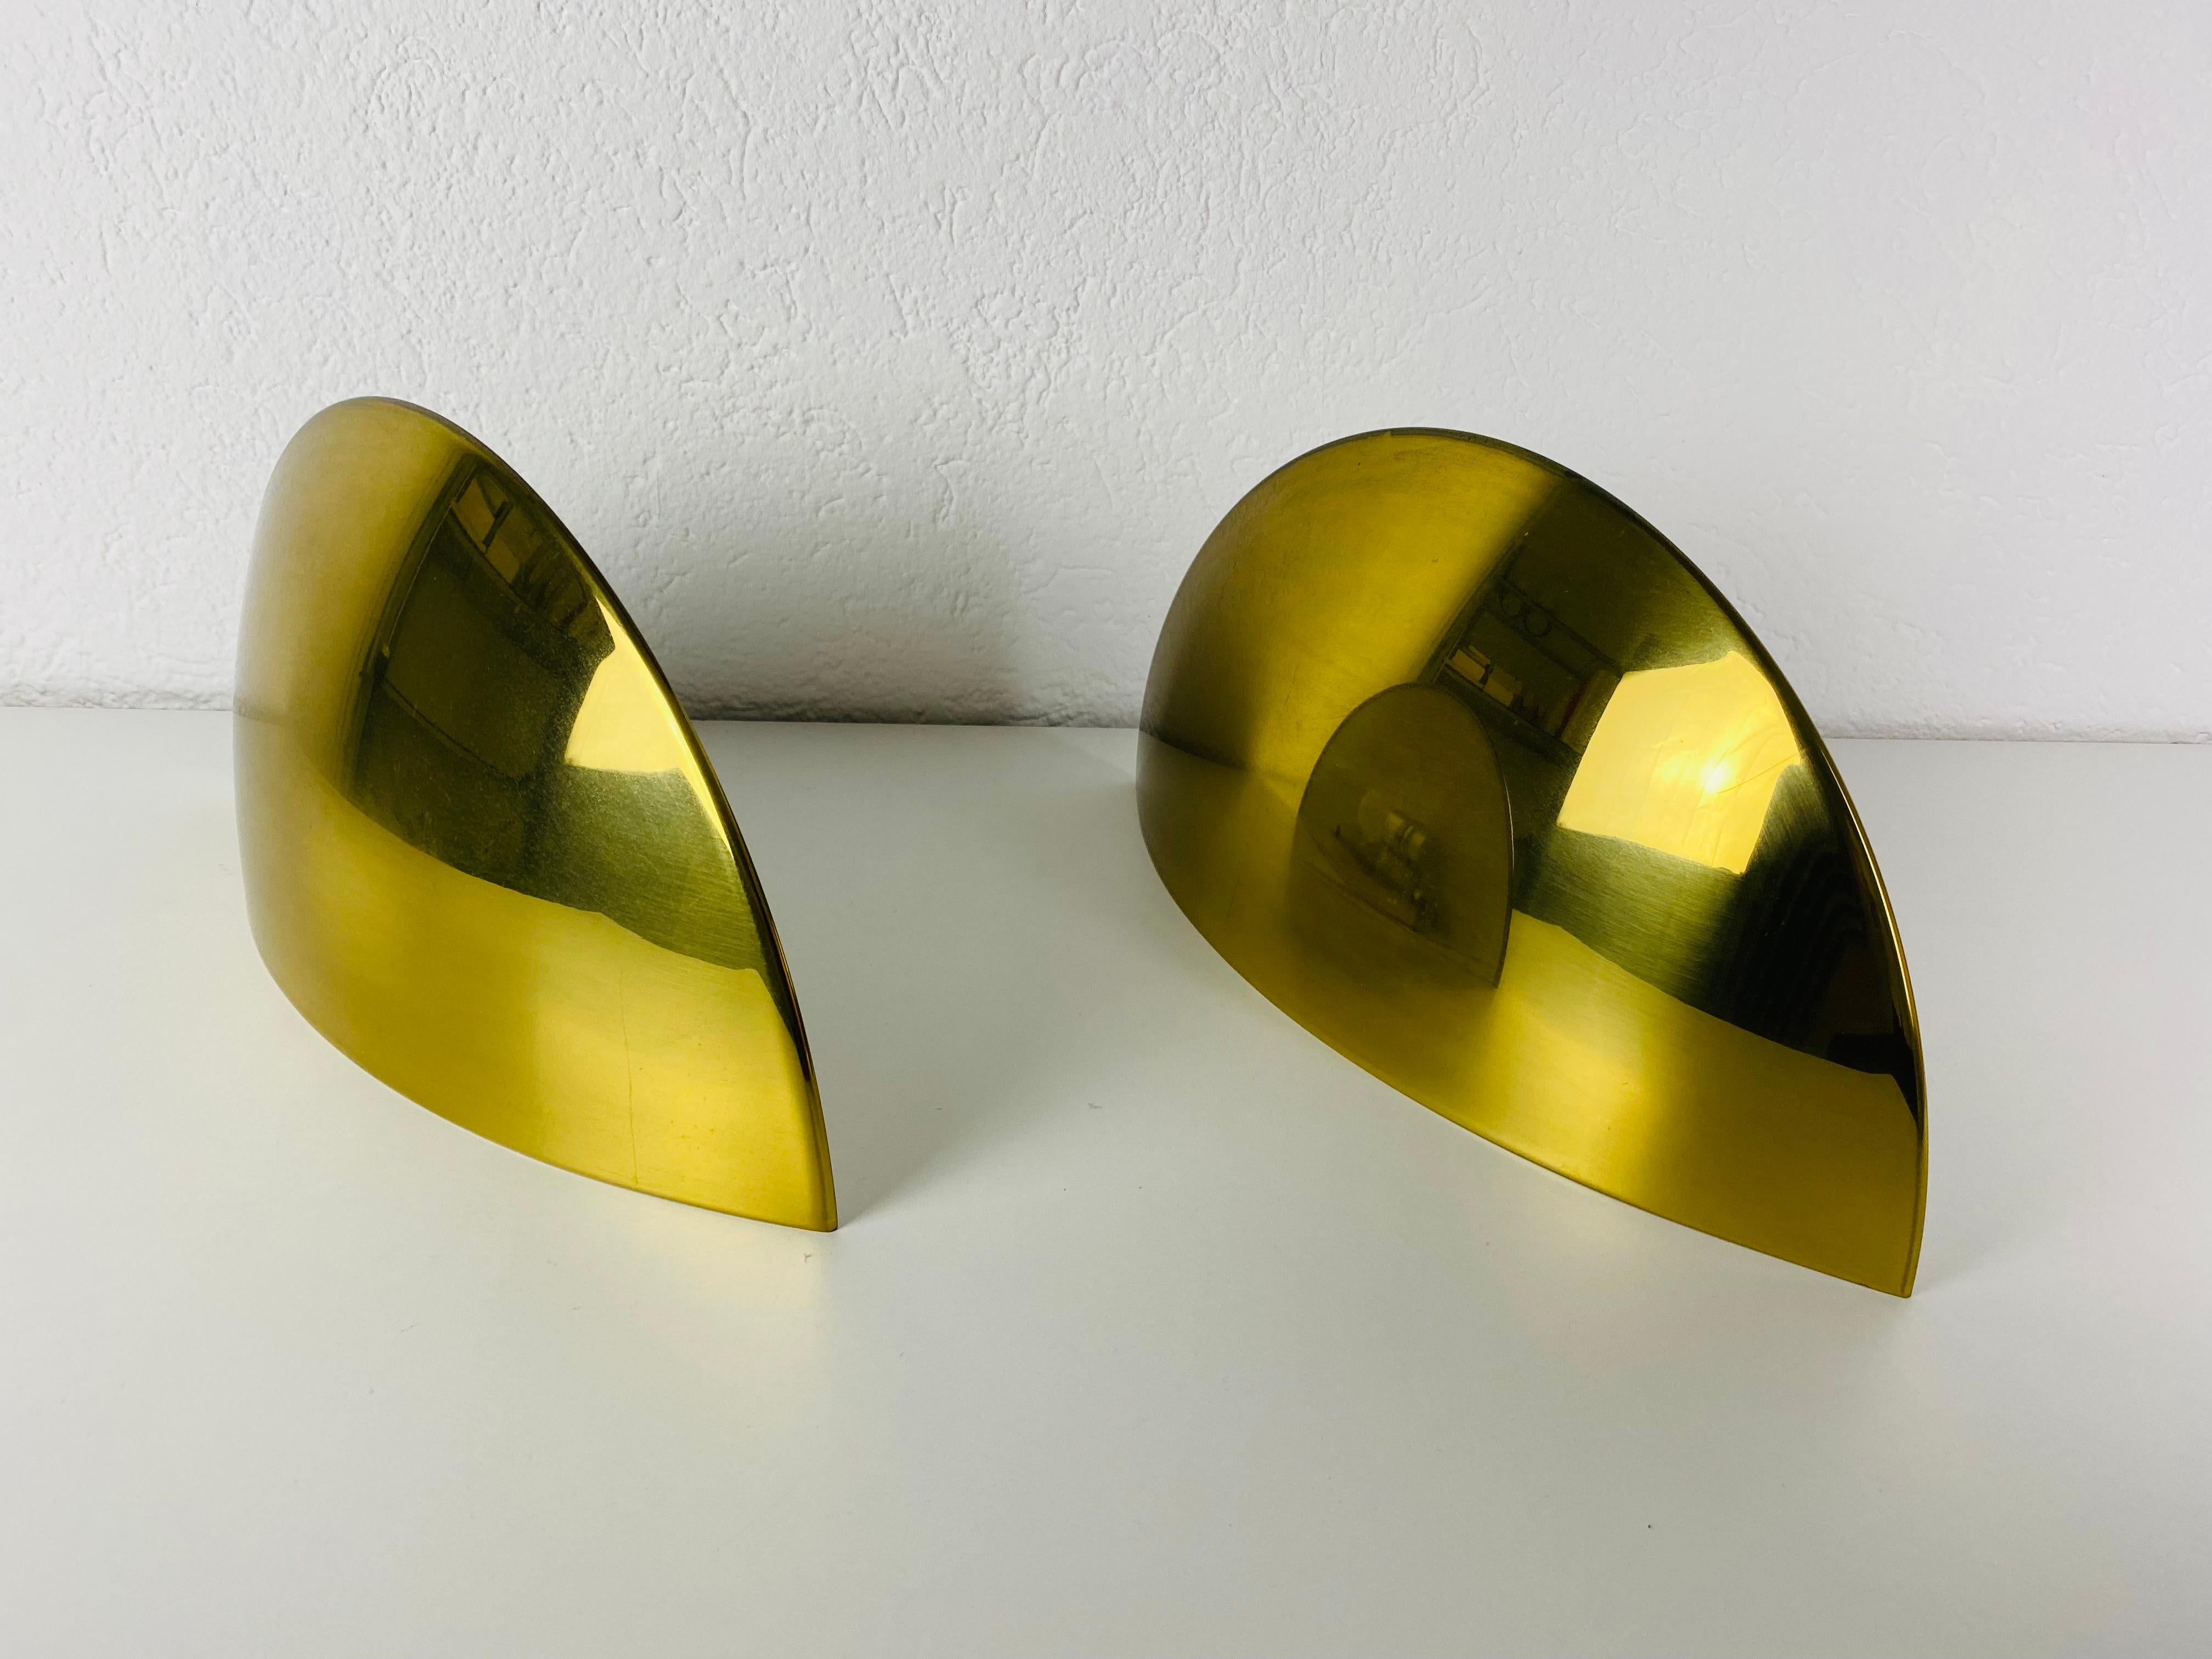 Pair of Florian Schulz Midcentury Brass Wall Lamps, 1960s In Good Condition For Sale In Hagenbach, DE